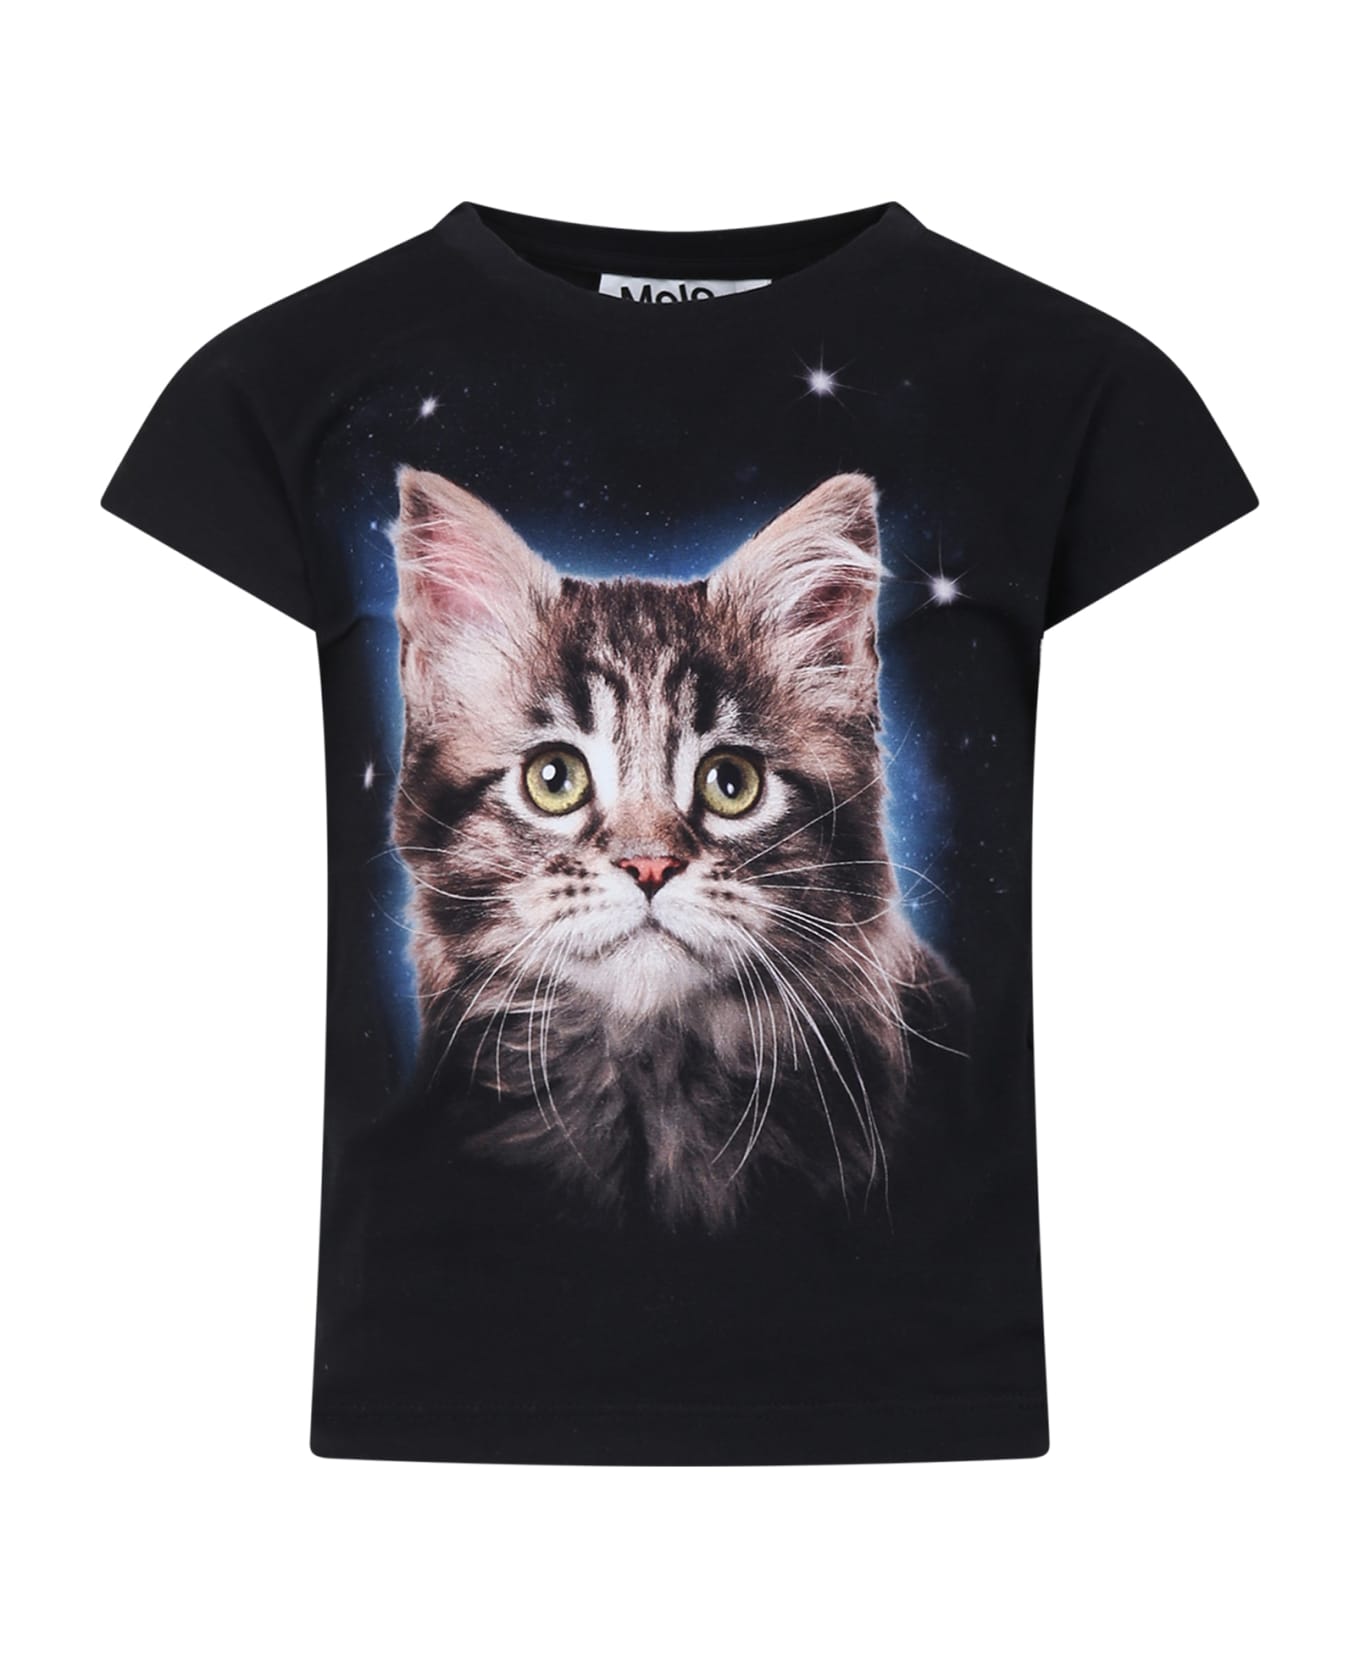 Molo Black T-shirt For Girl With Cat Print - Black